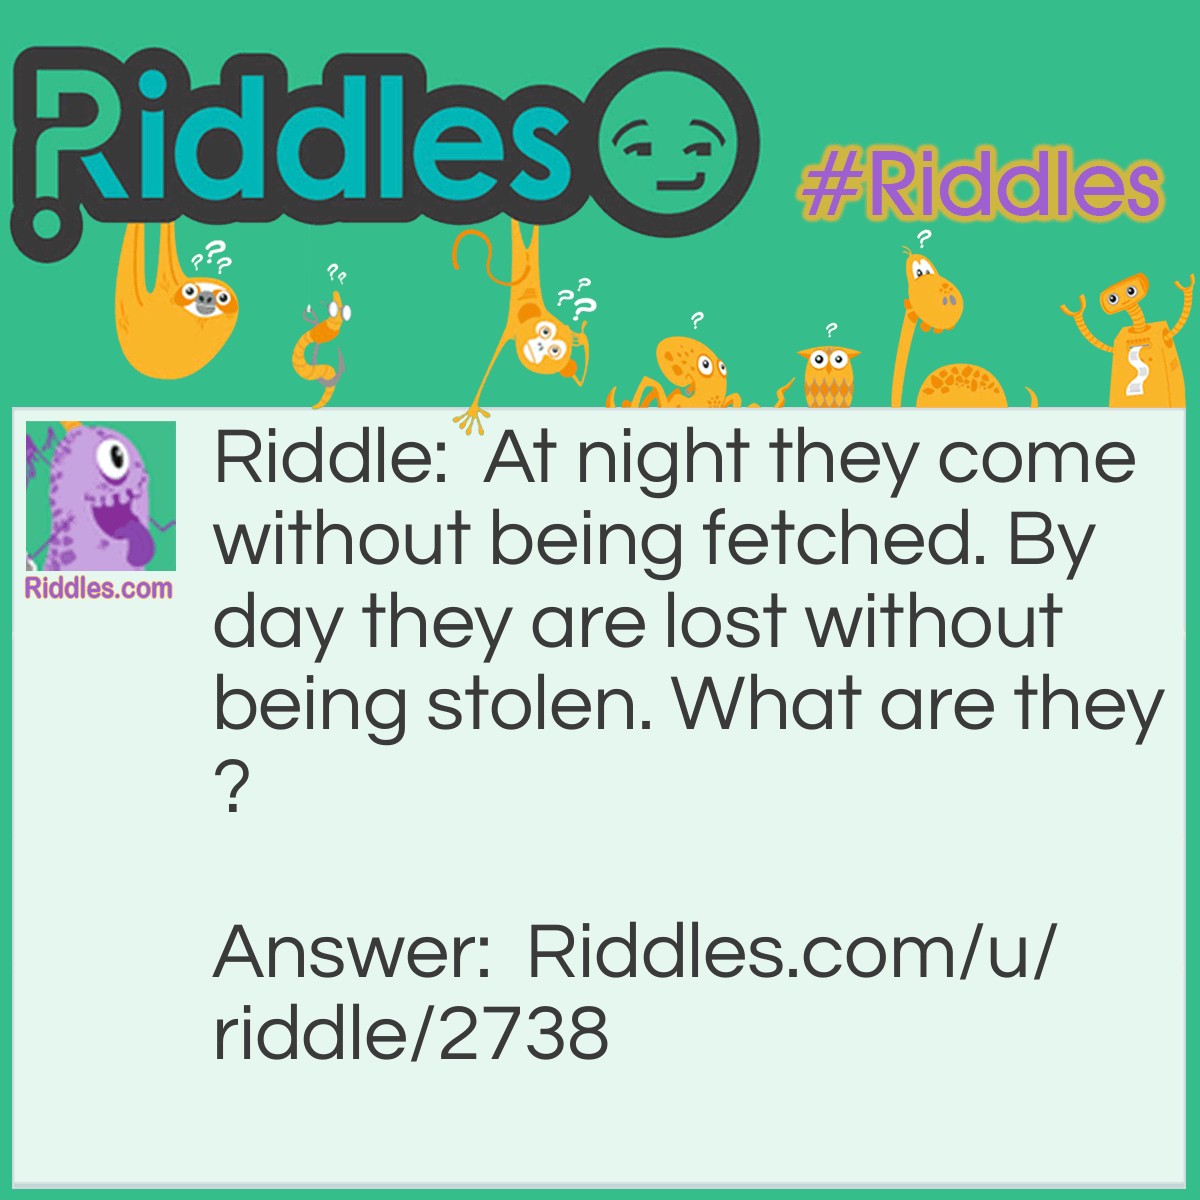 Riddle: At night they come without being fetched. By day they are lost without being stolen. What are they? Answer: Stars.